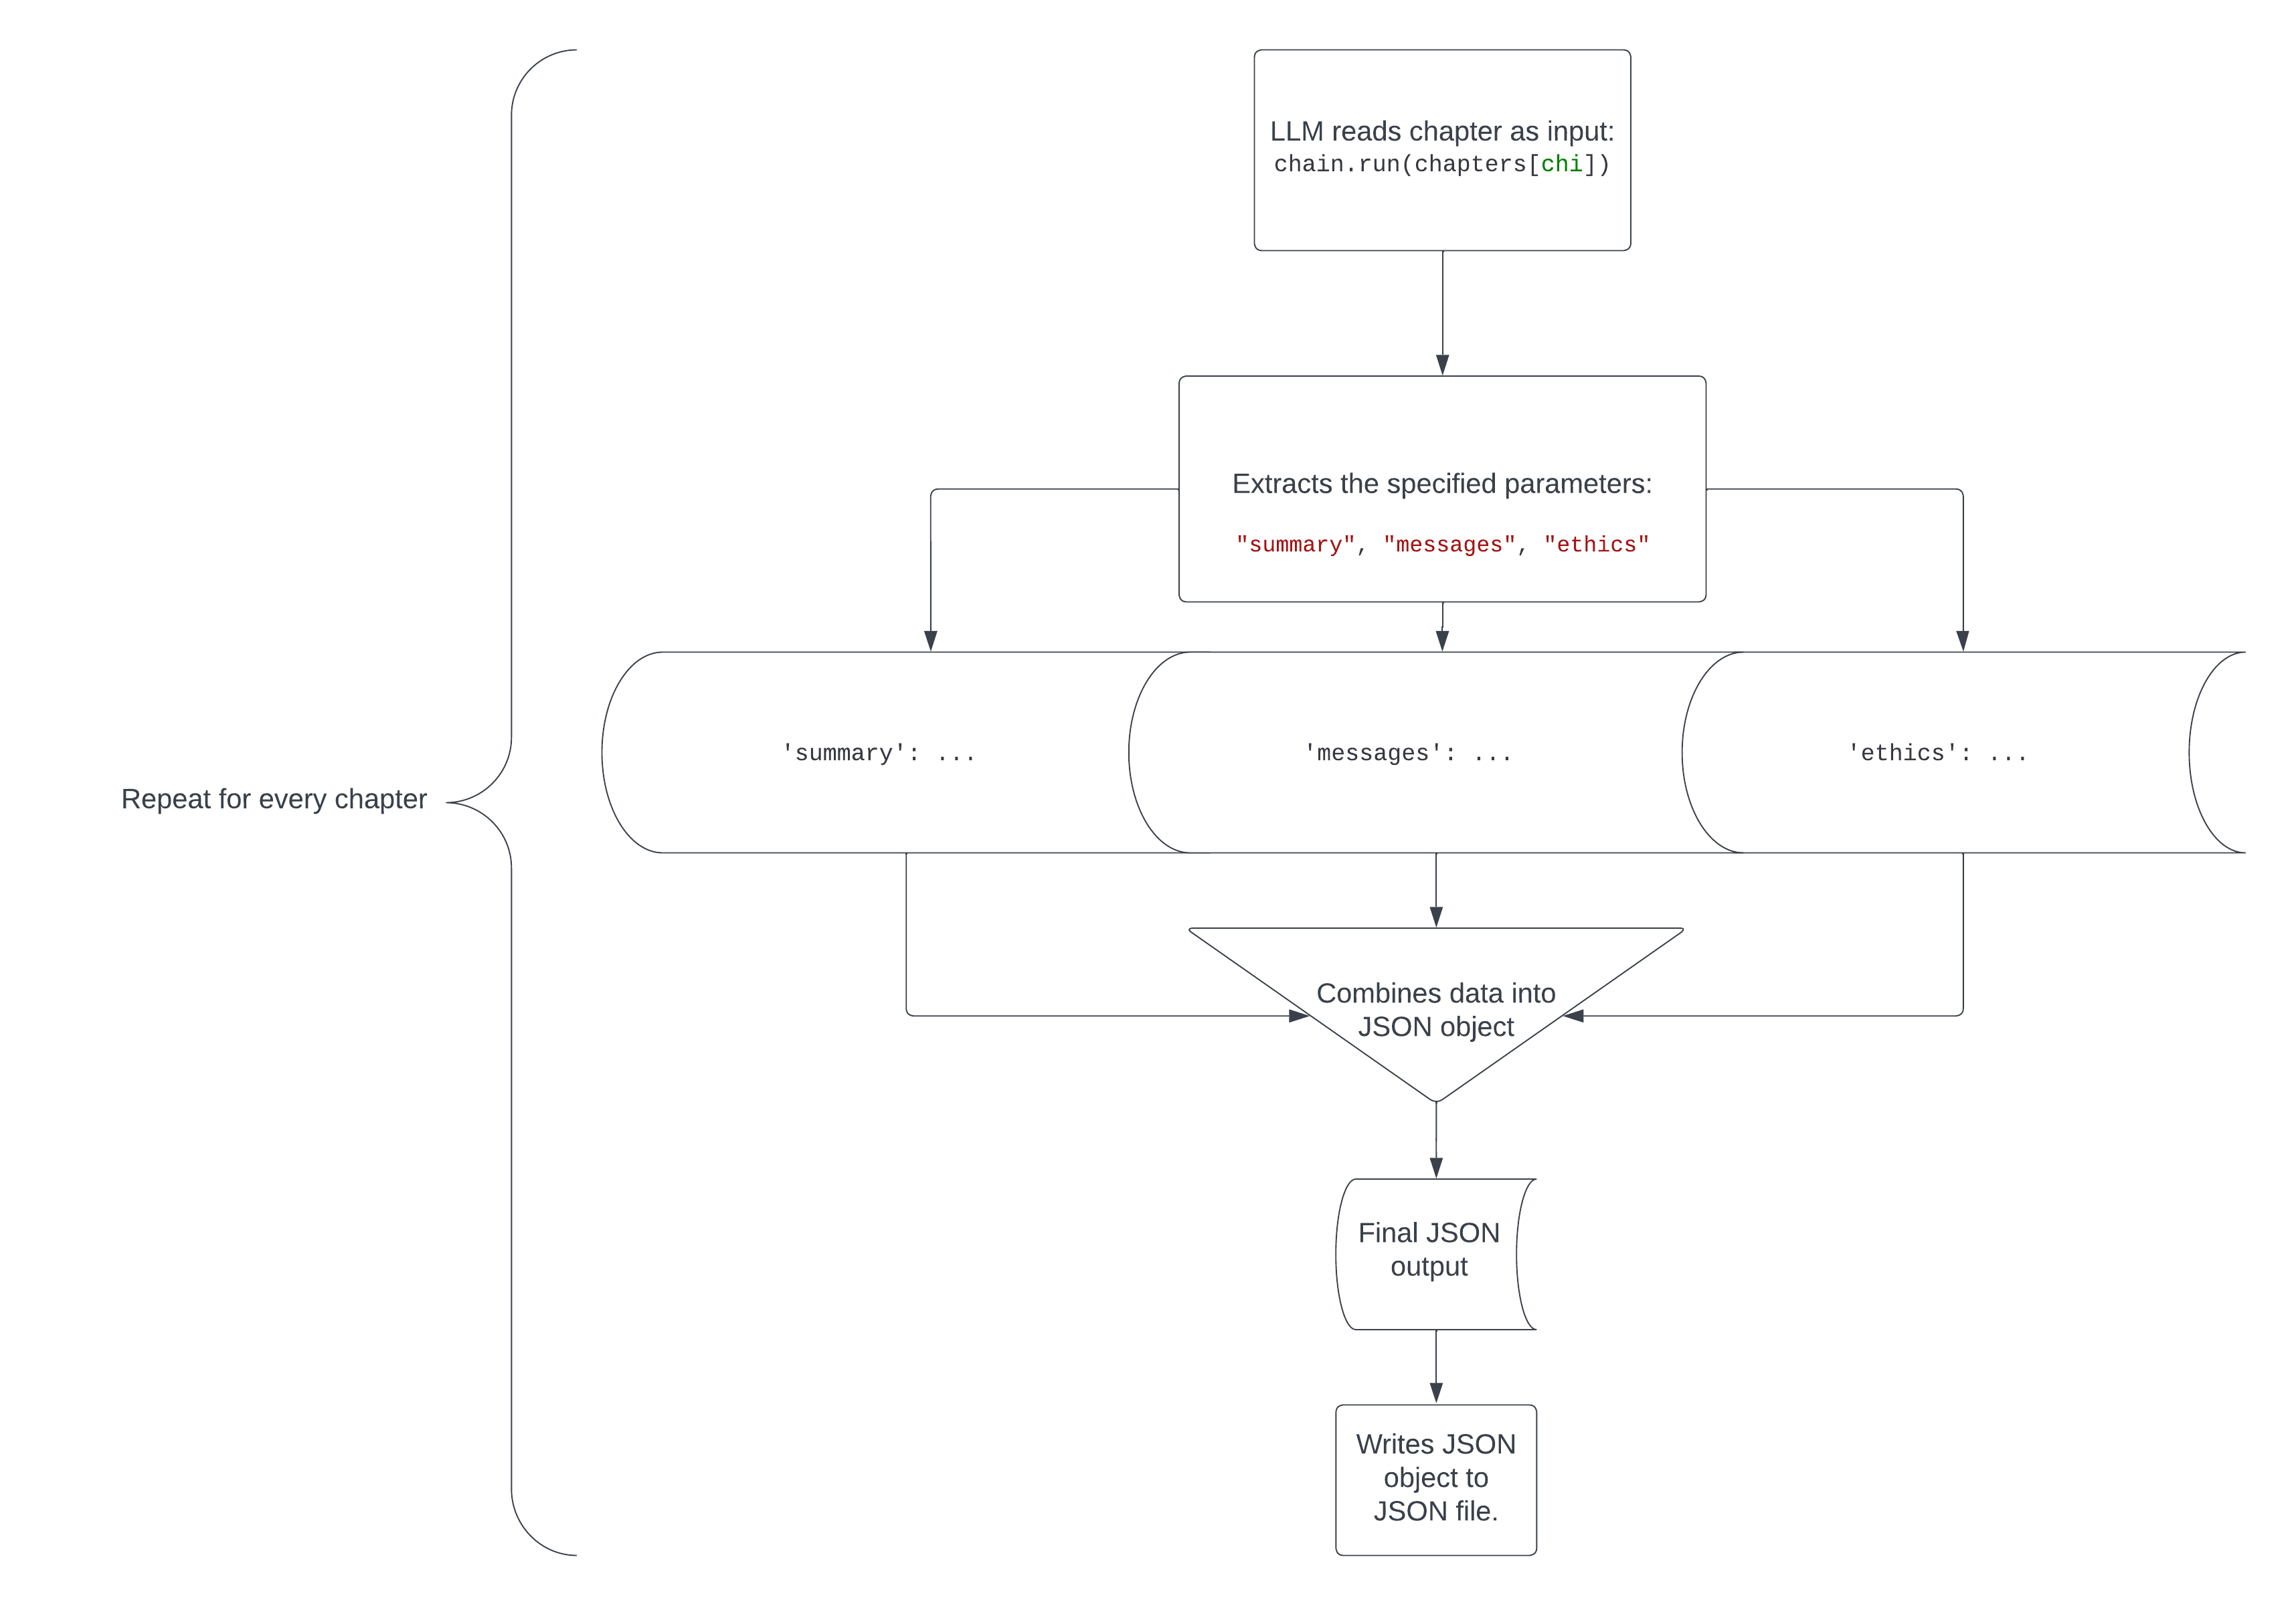 Flowchart of how the code works with multiple chapters